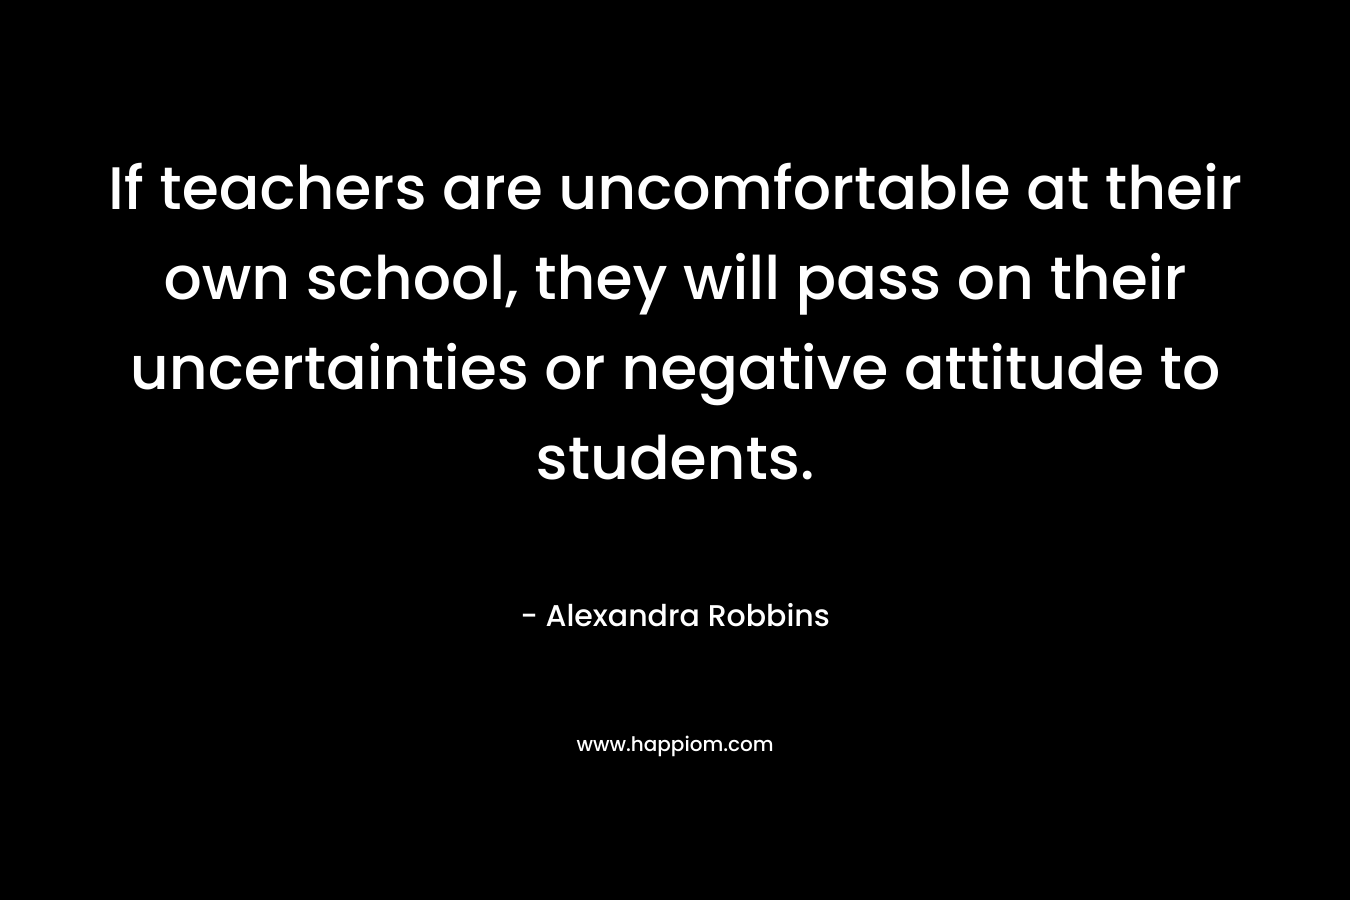 If teachers are uncomfortable at their own school, they will pass on their uncertainties or negative attitude to students. – Alexandra Robbins